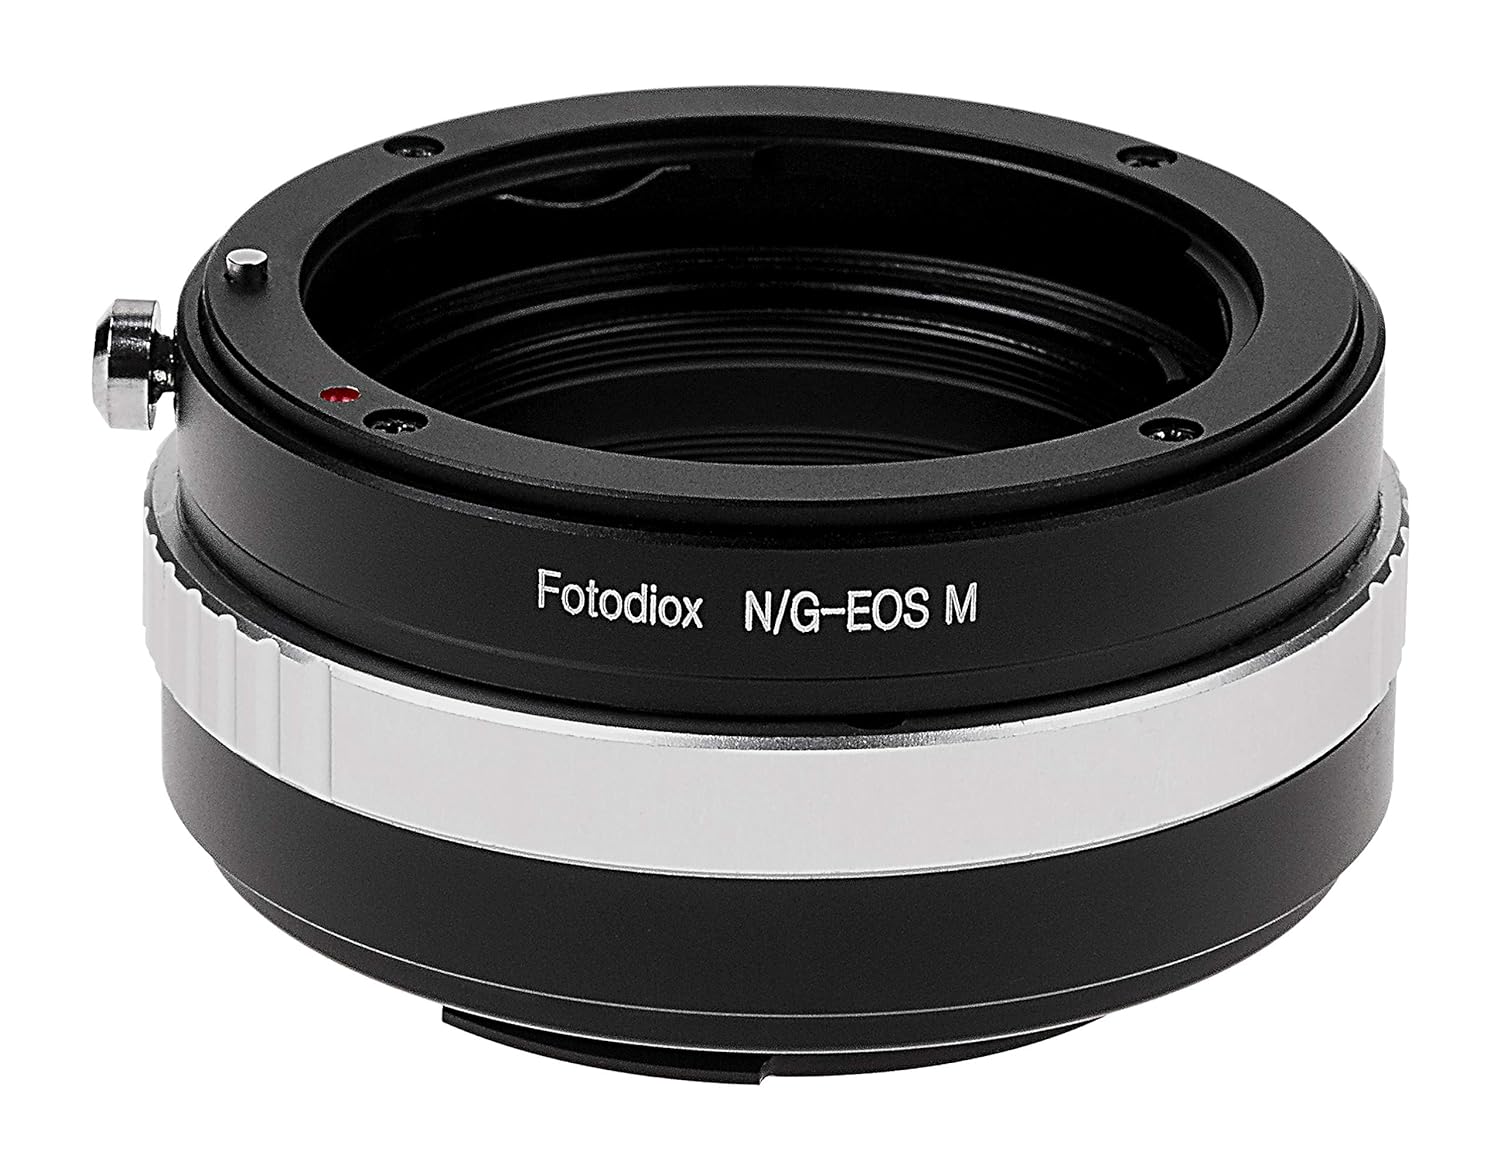 Fotodiox Lens Mount Adapter - Nikon F Mount G-Type D/SLR Lens to Canon EOS M (EF-M Mount) Mirrorless Camera Body with Built-in Aperture Control Dial